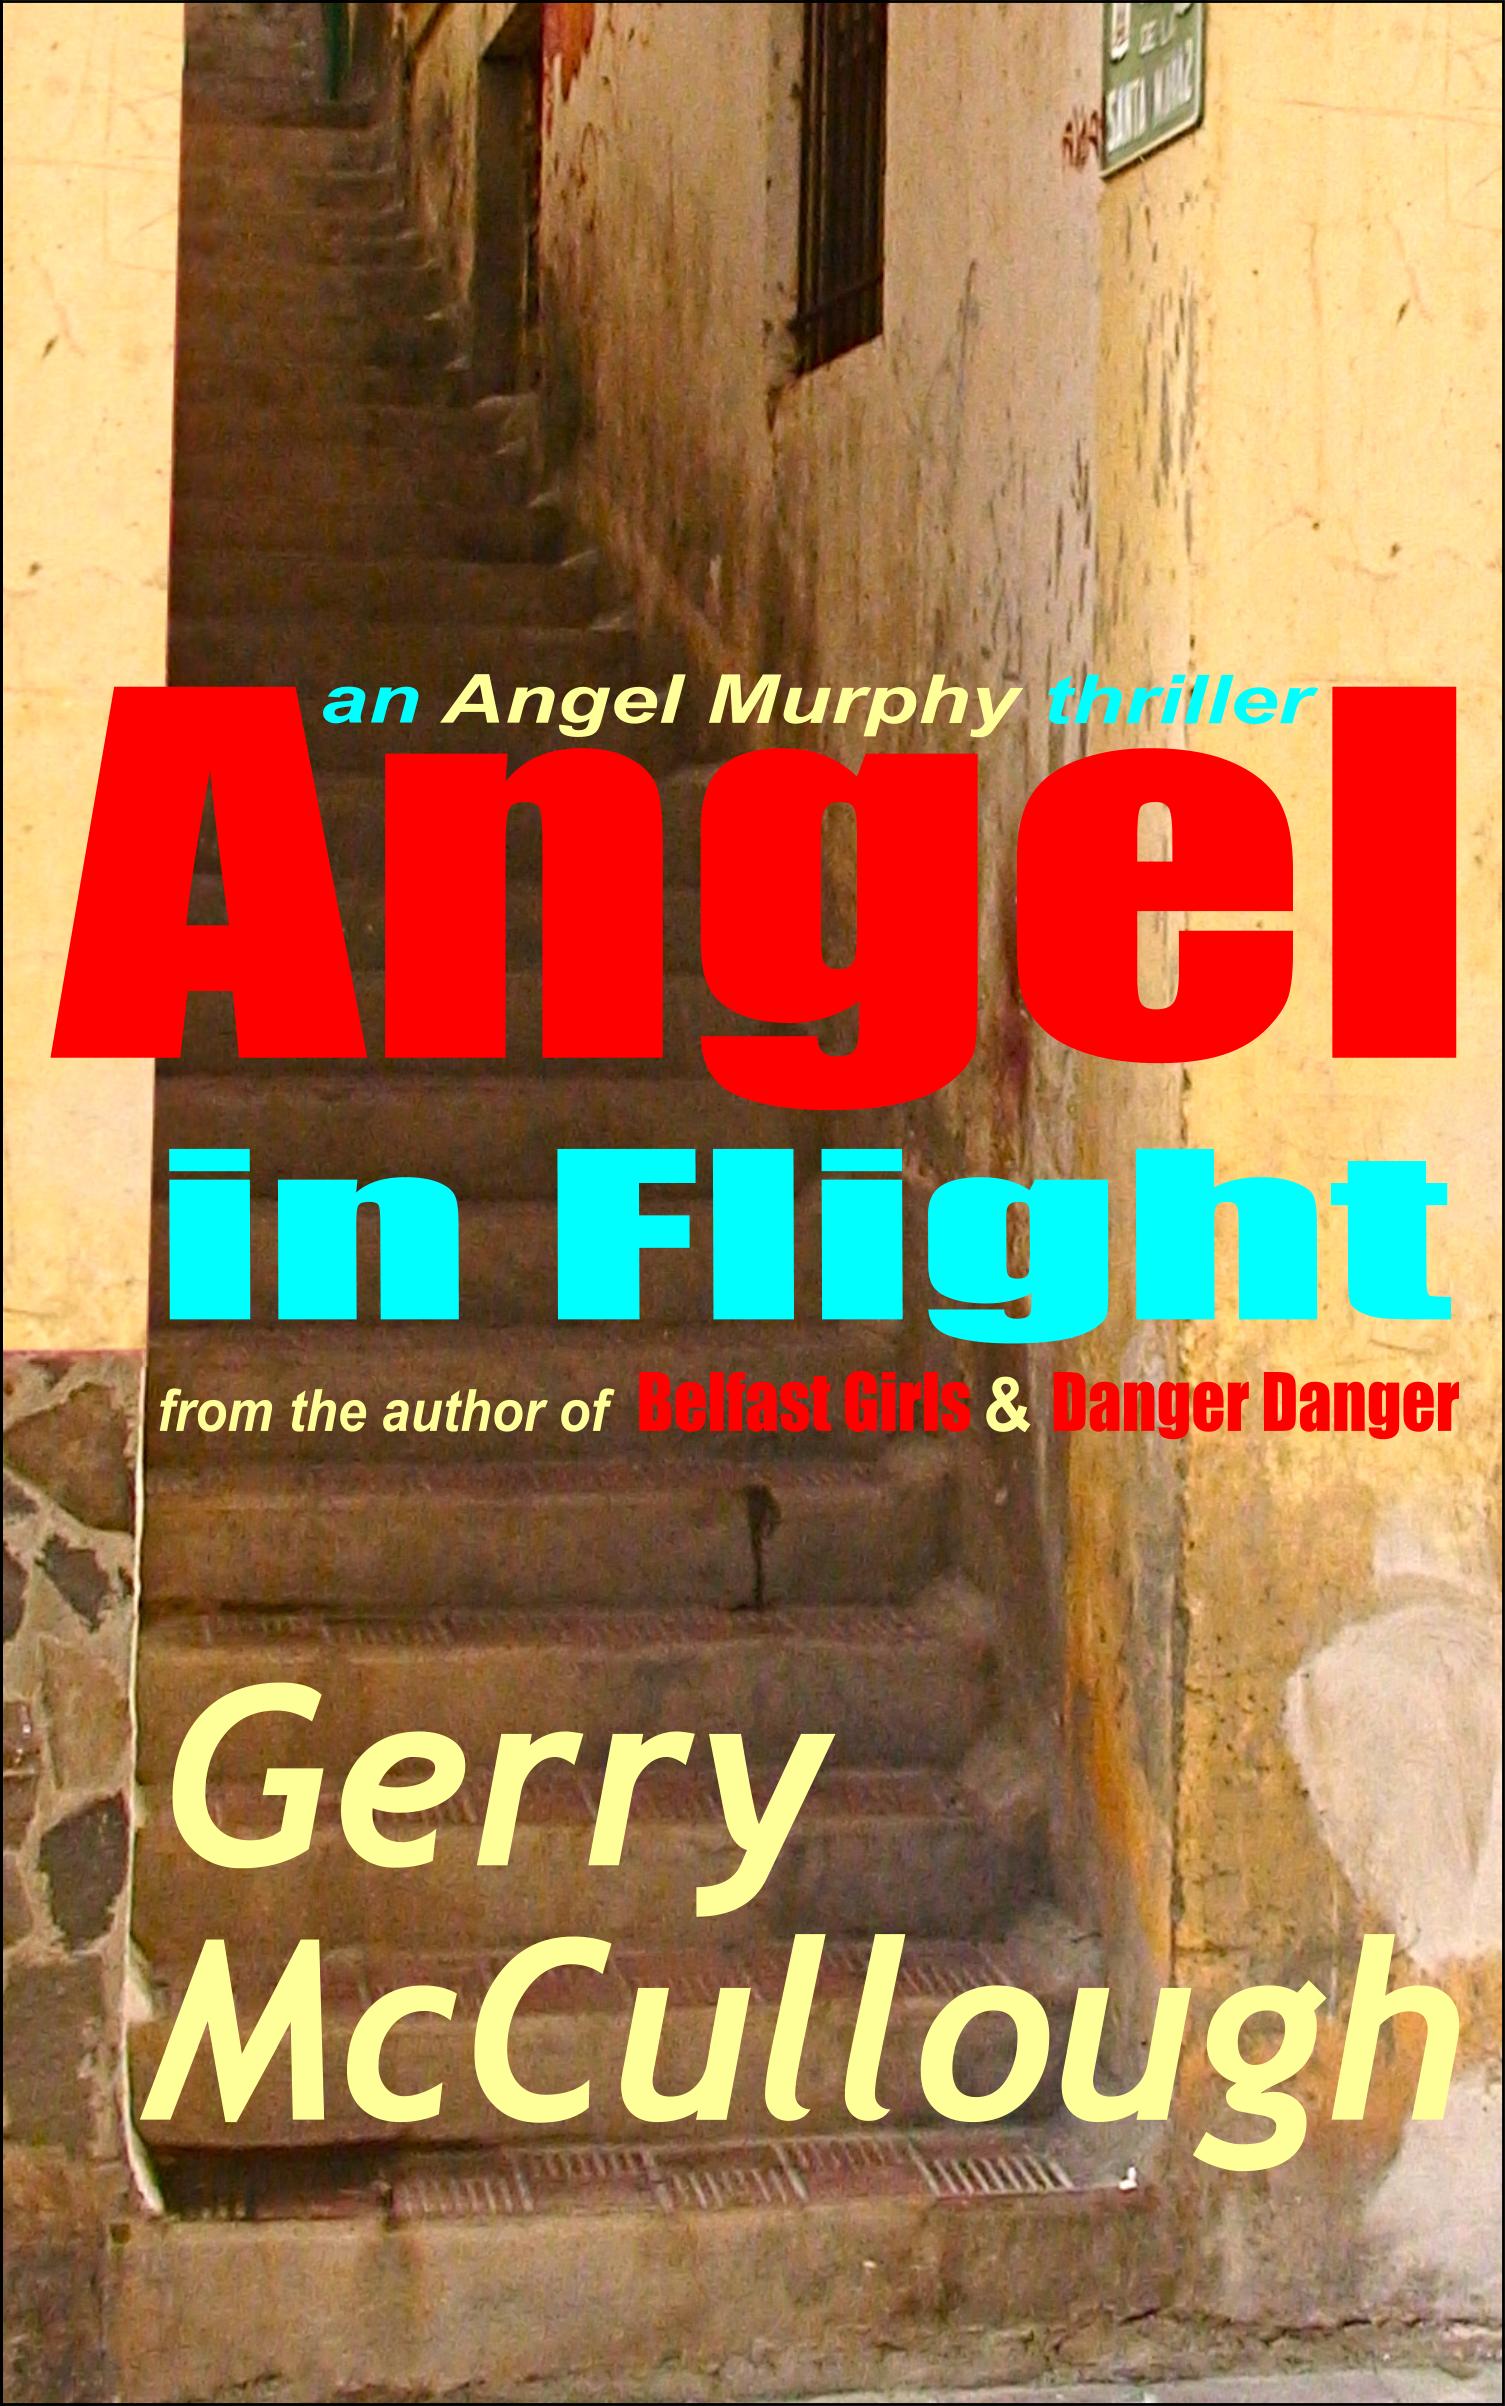 Buy Angel in Flight from Amazon & other outlets